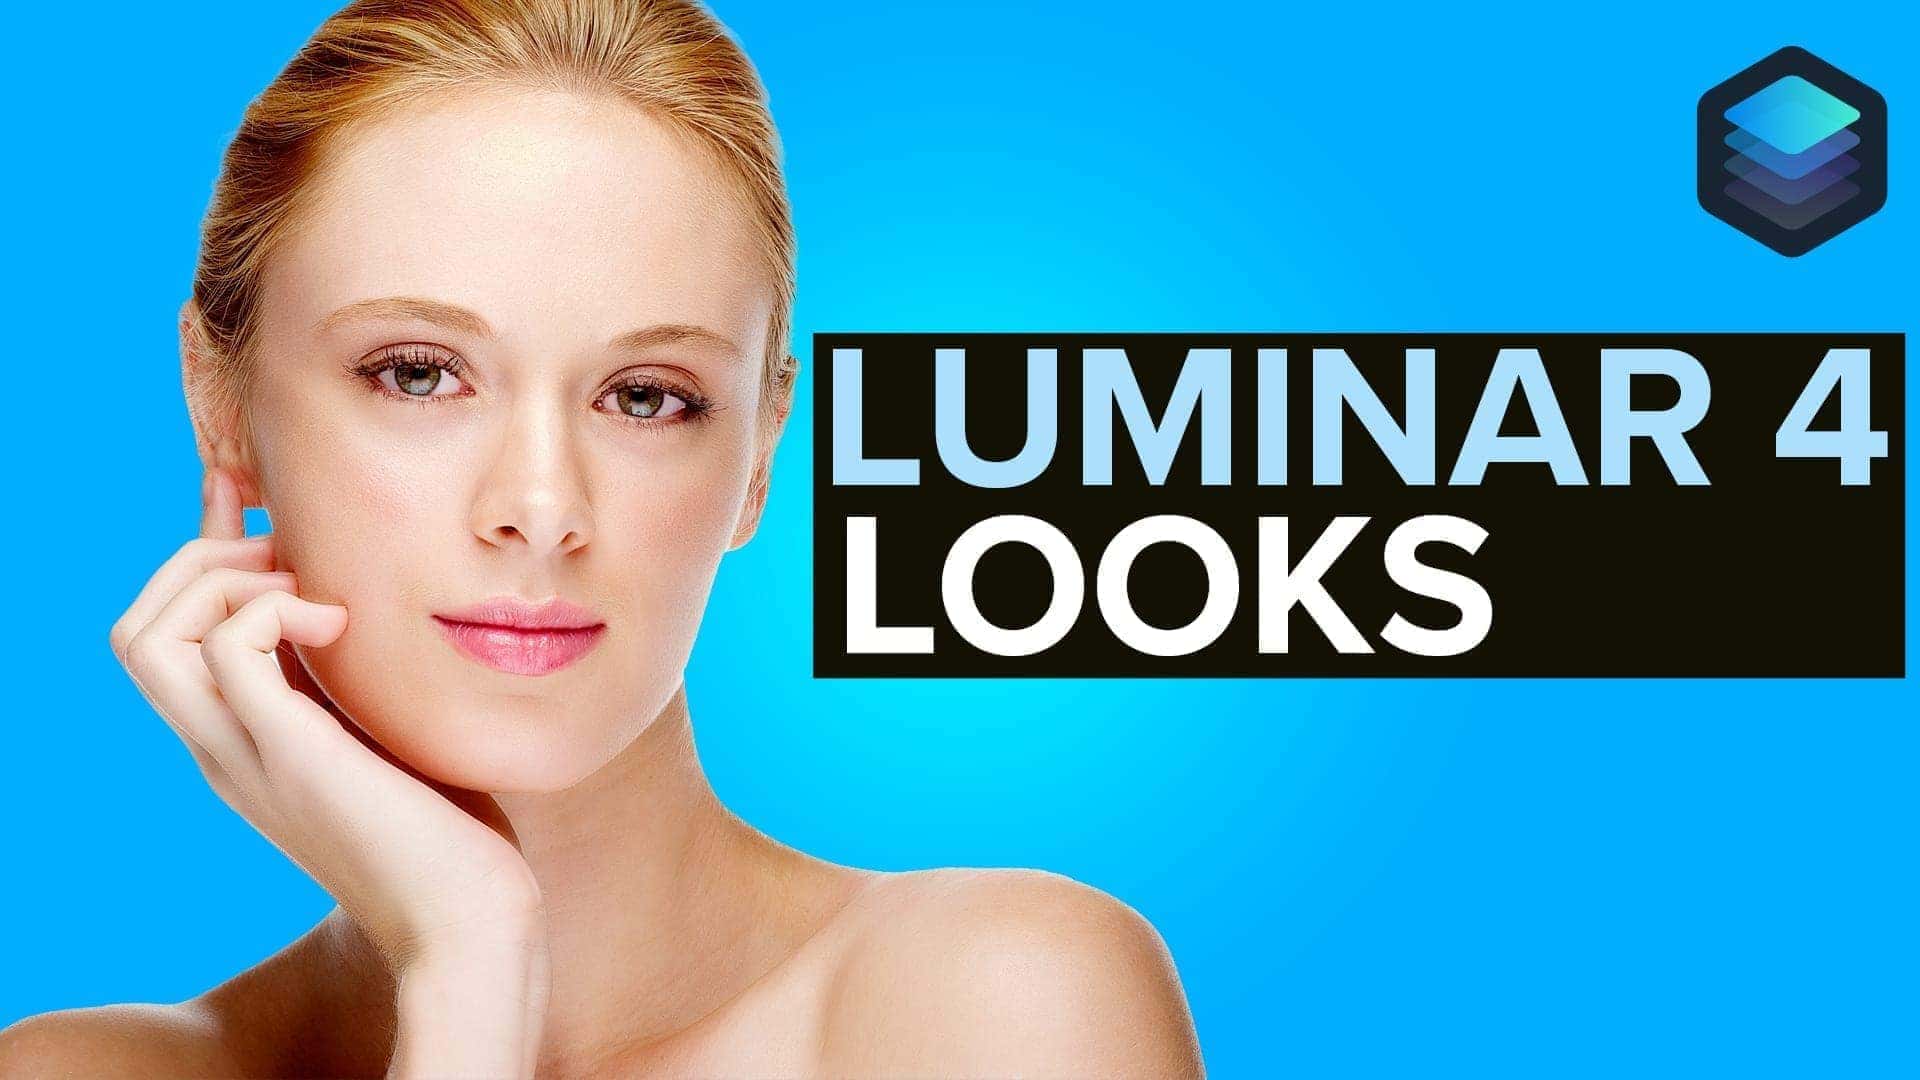 Luminar 4 Looks (Presets) Help You Save Time